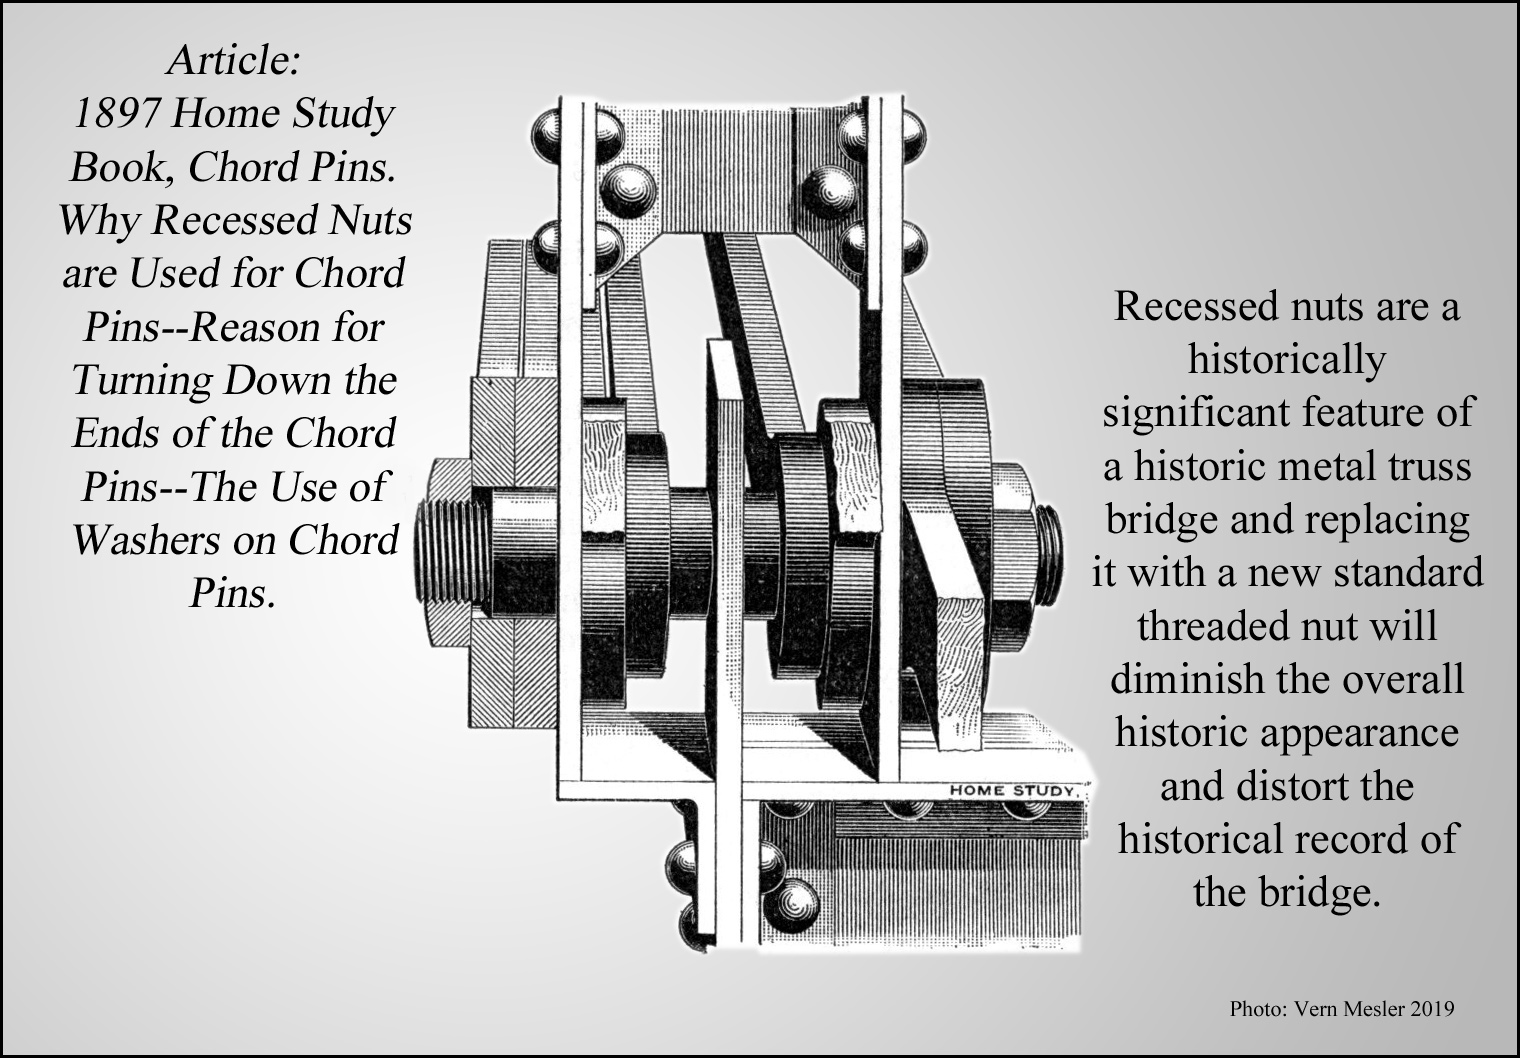 Chord pins and recessed nuts